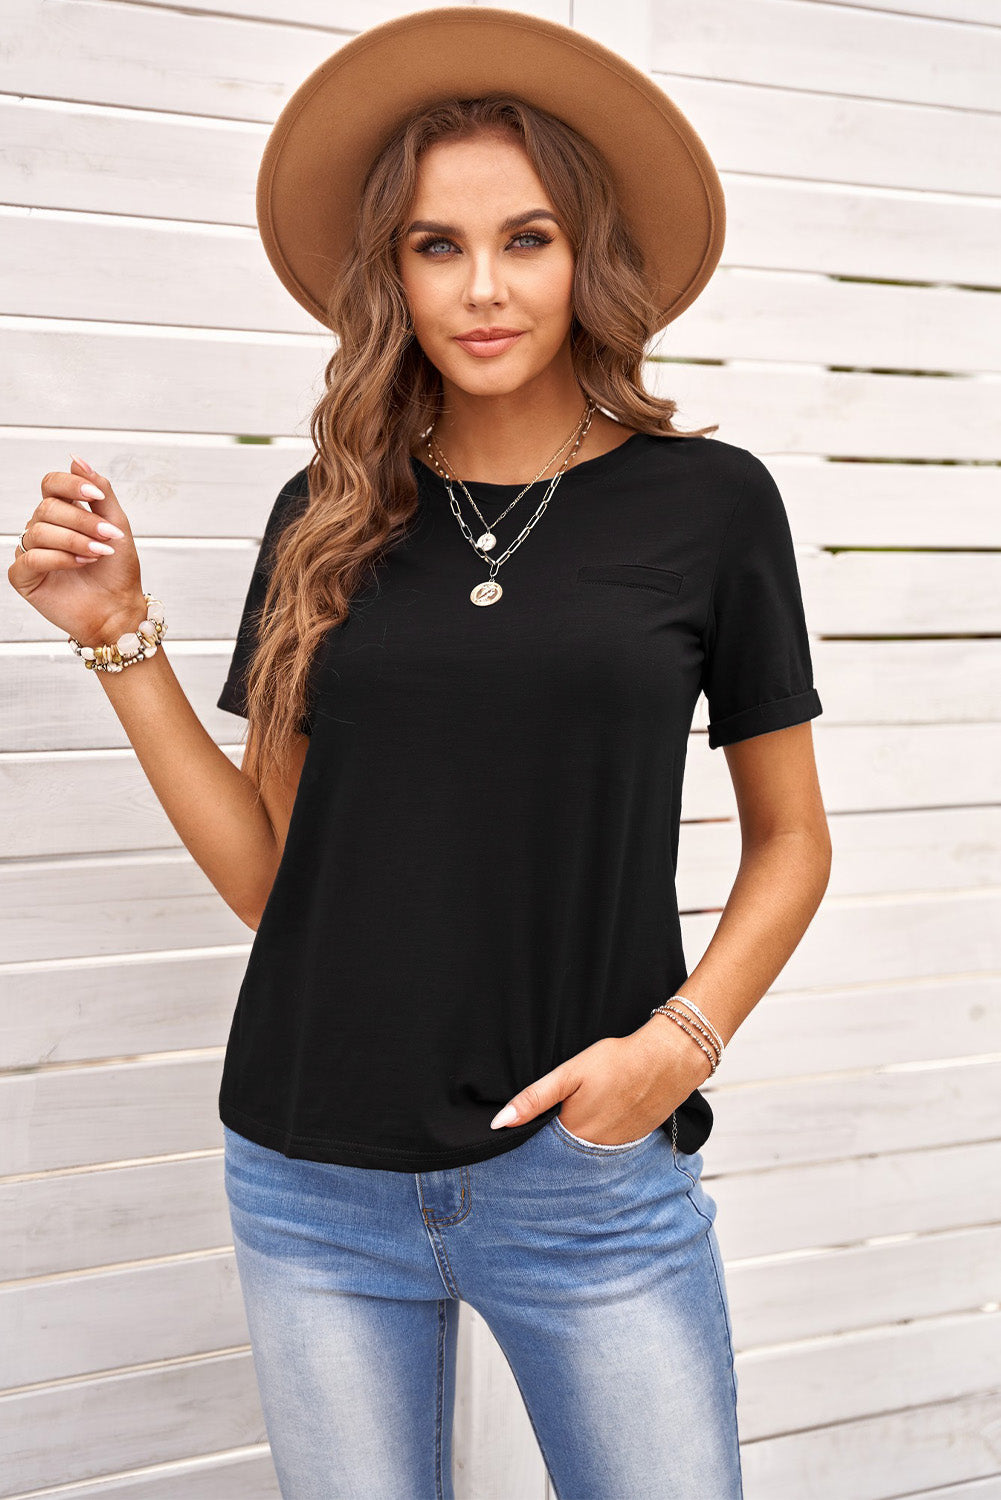 Just For You Cuffed Sleeve T-Shirt